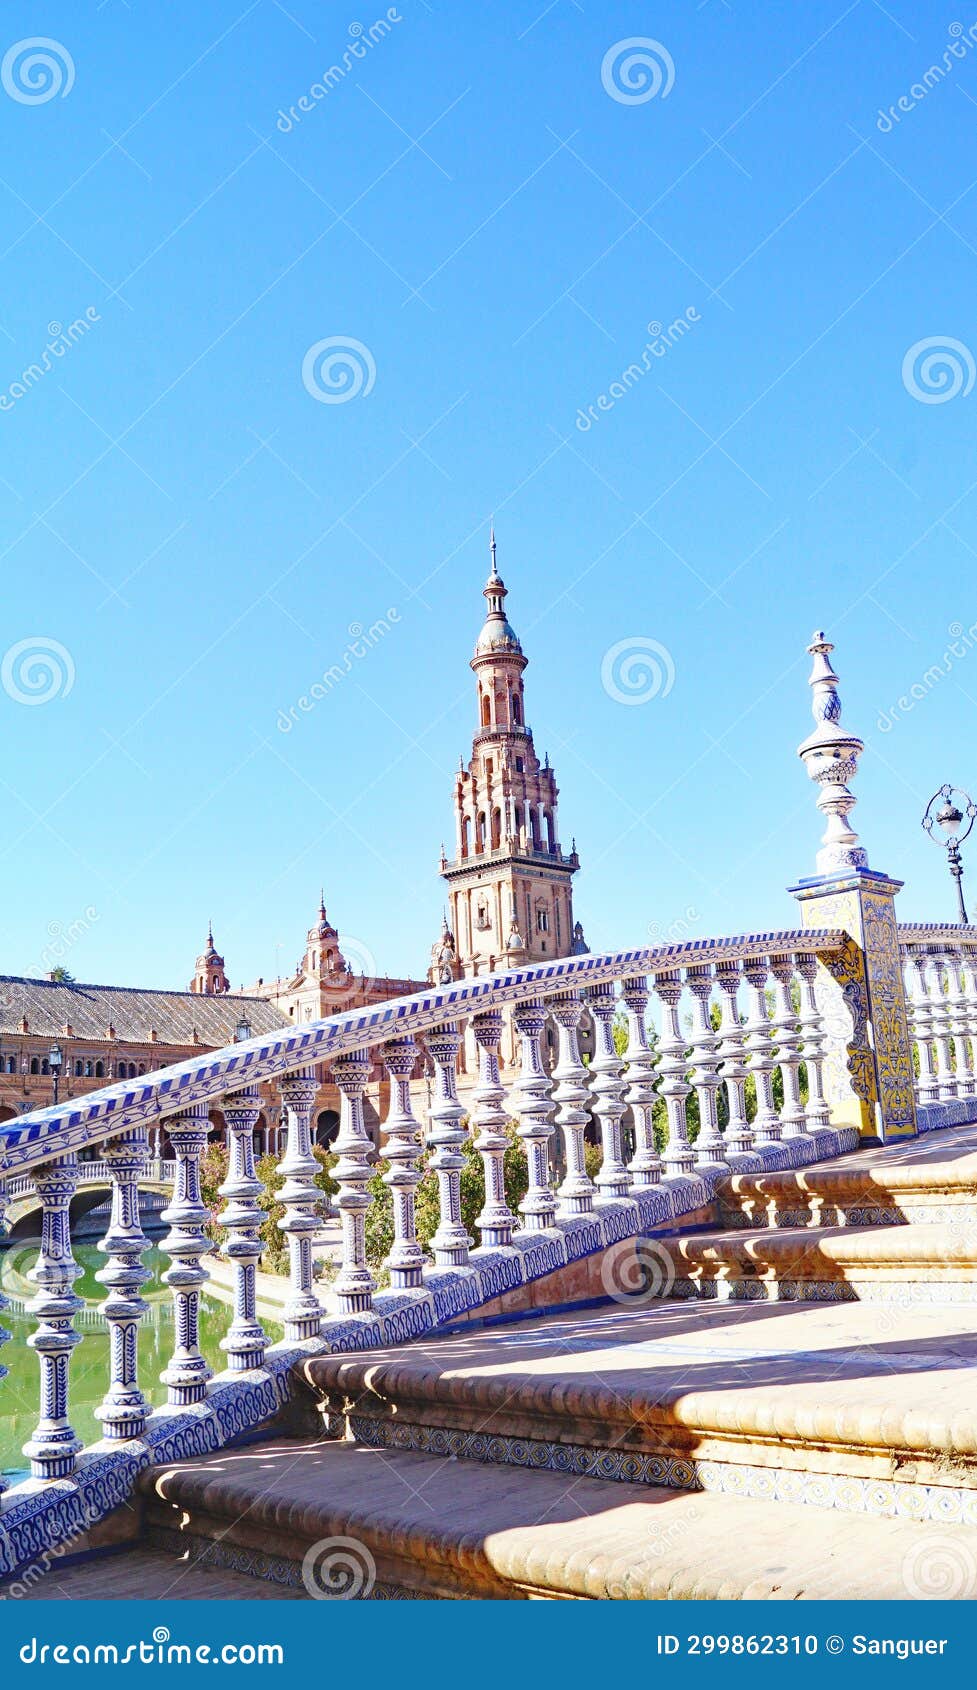 panoramic of plaza espaÃ±a or marÃ­a luisa park square in seville